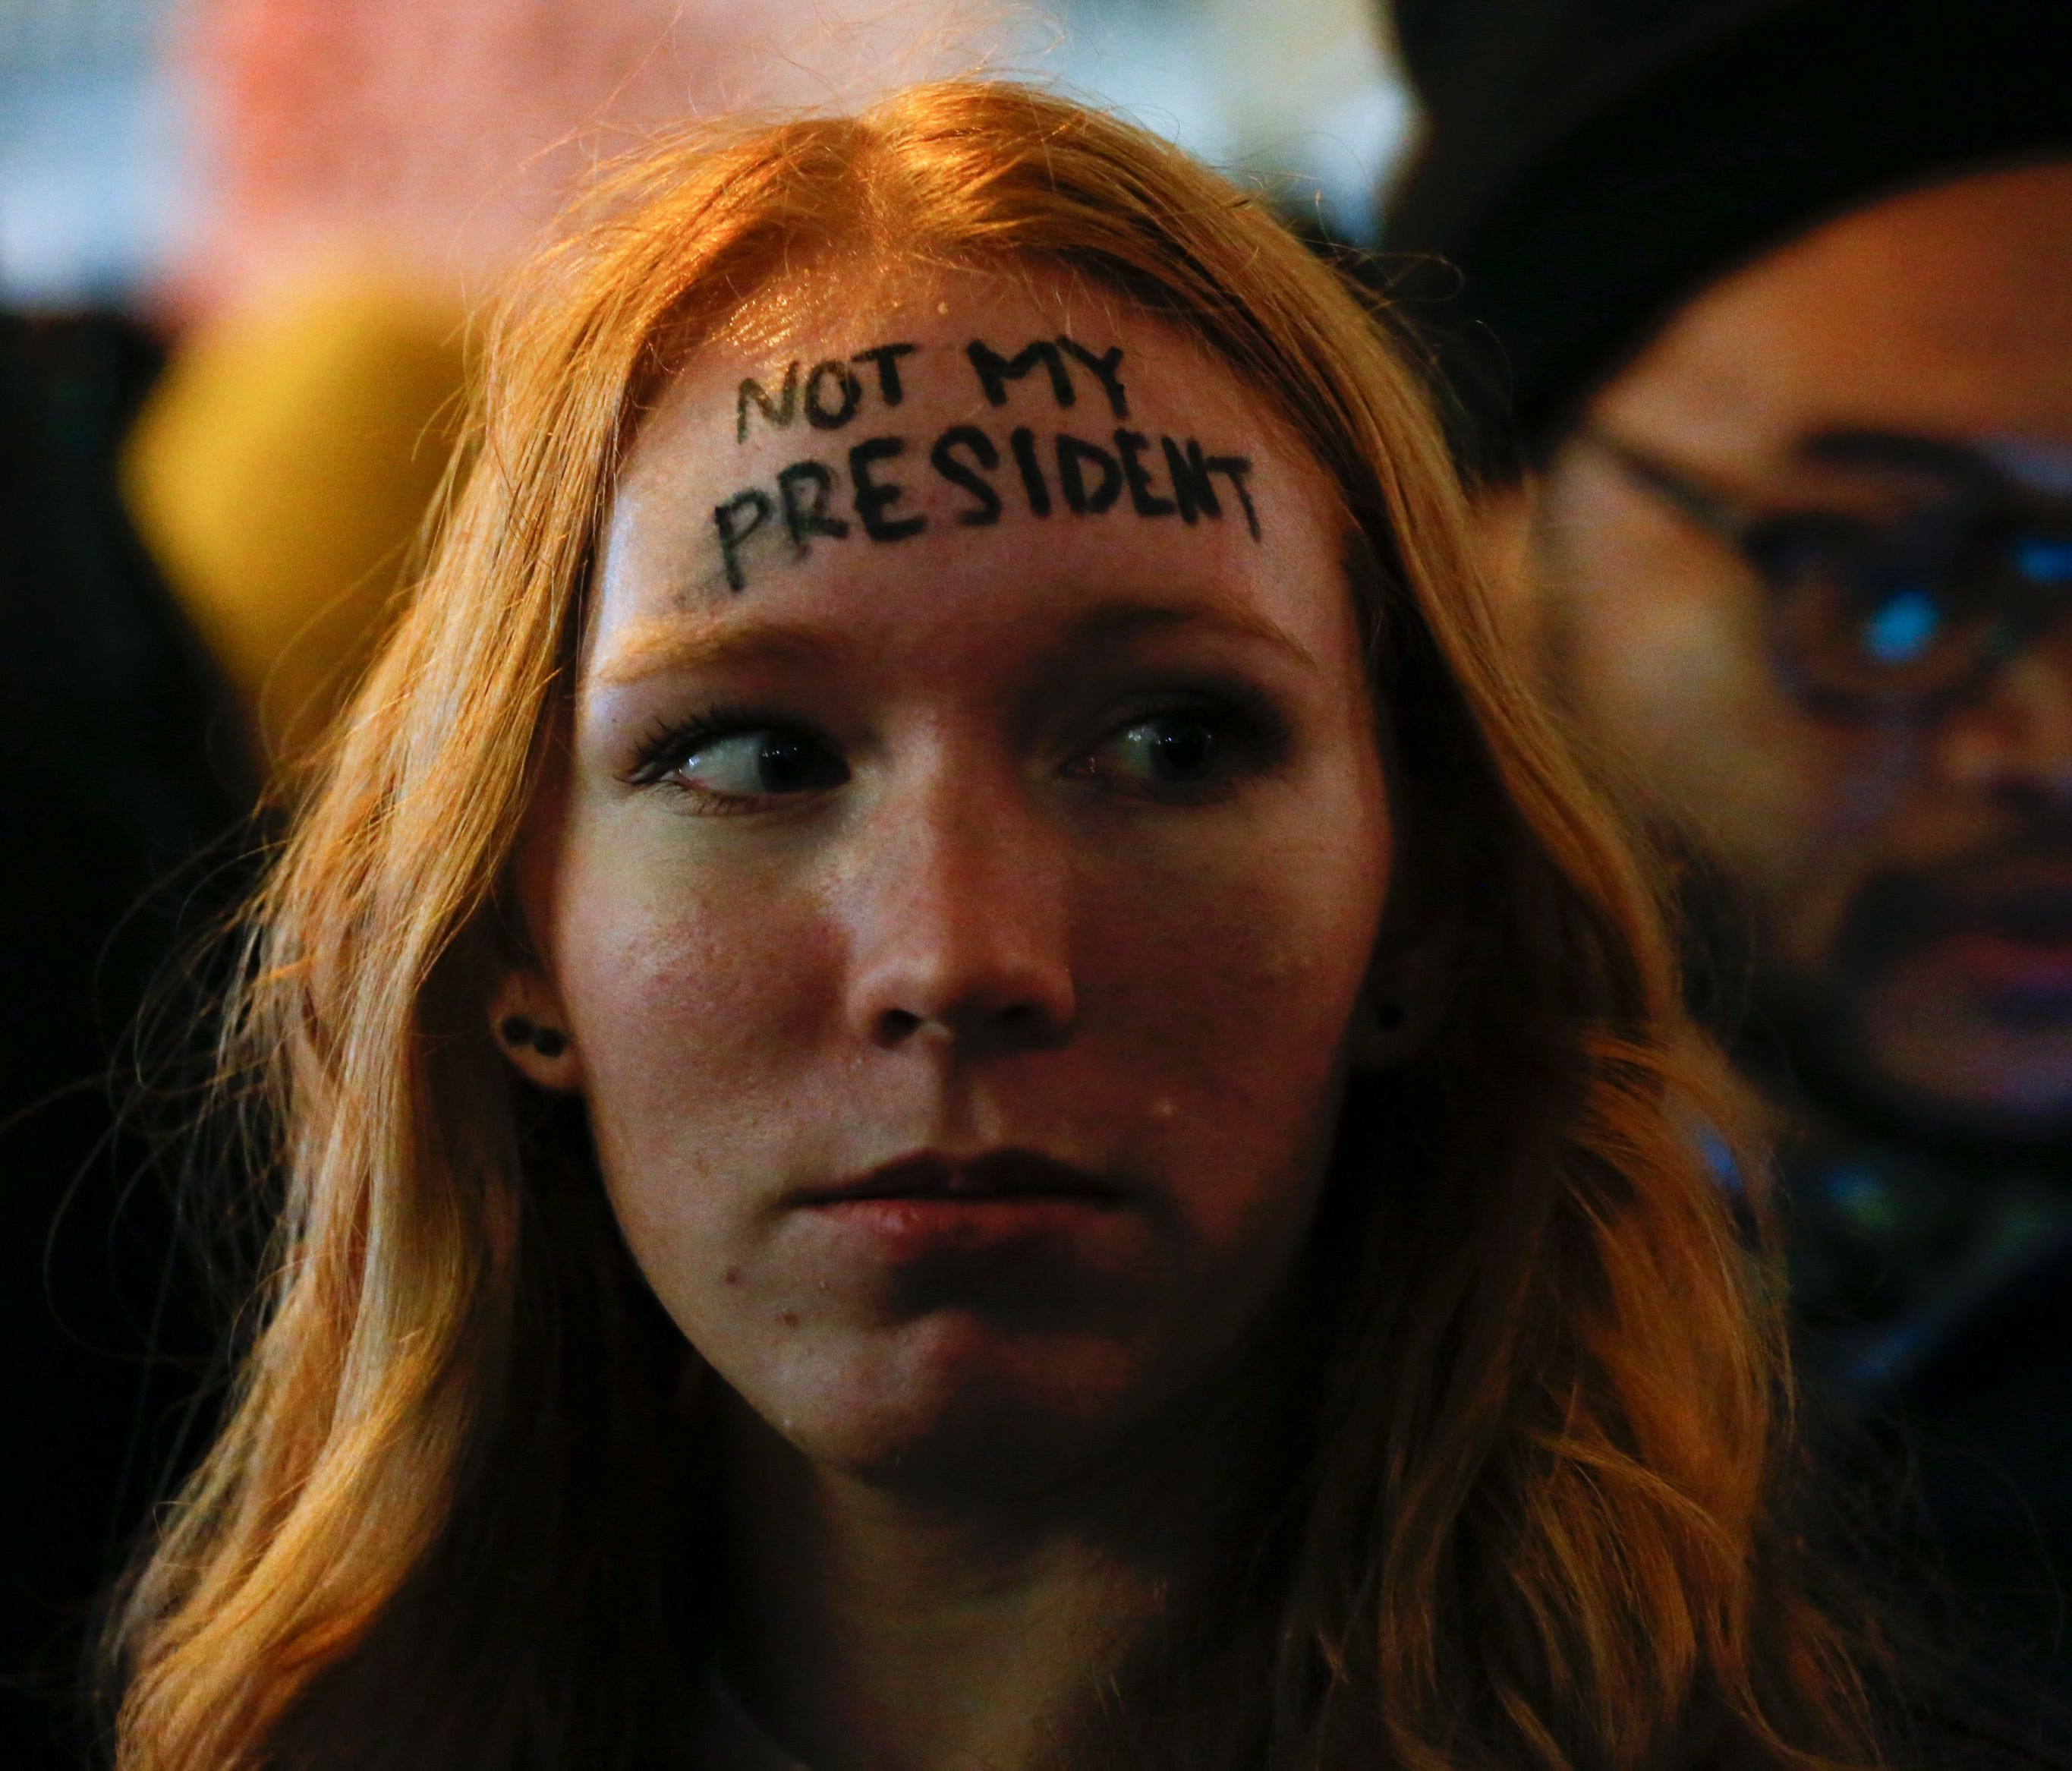 A woman protests Donald Trump in front of Trump Tower in New York on Nov. 10, 2016.